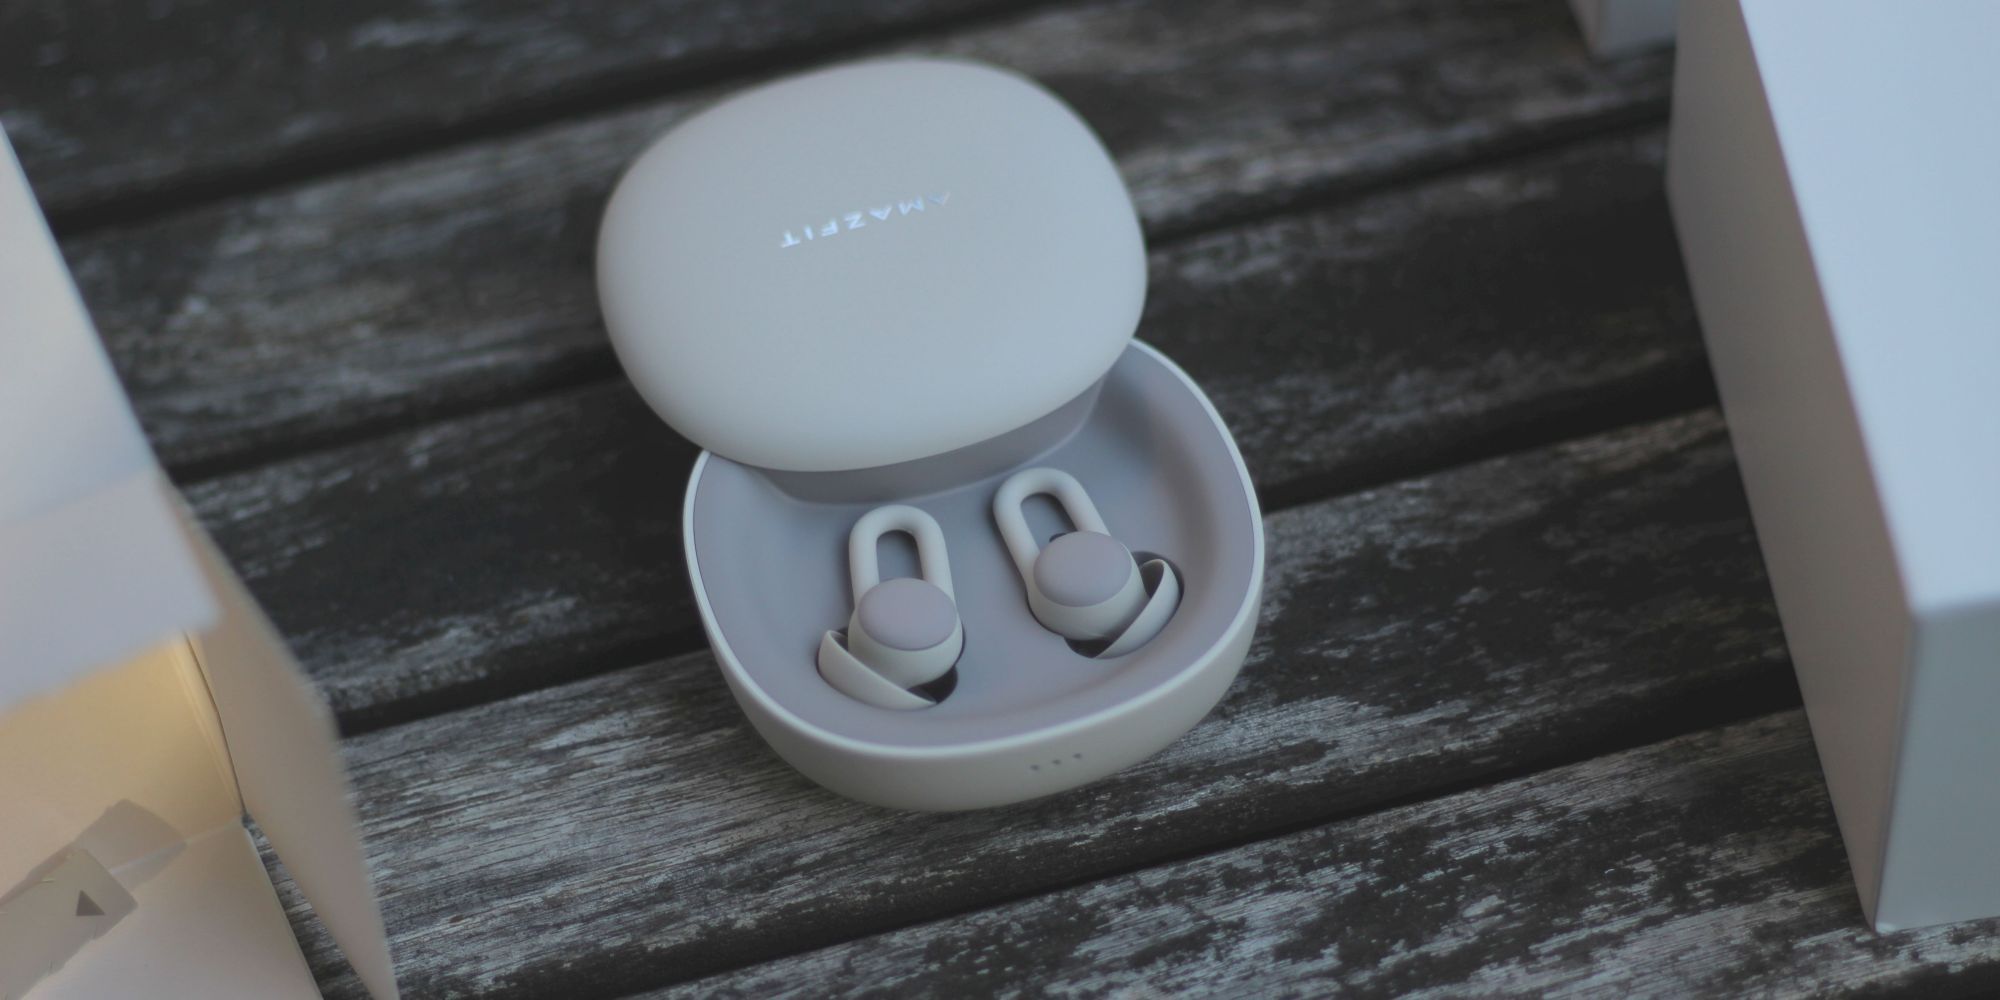 Amazfit ZenBuds Review: The Best Earbuds for Sleeping